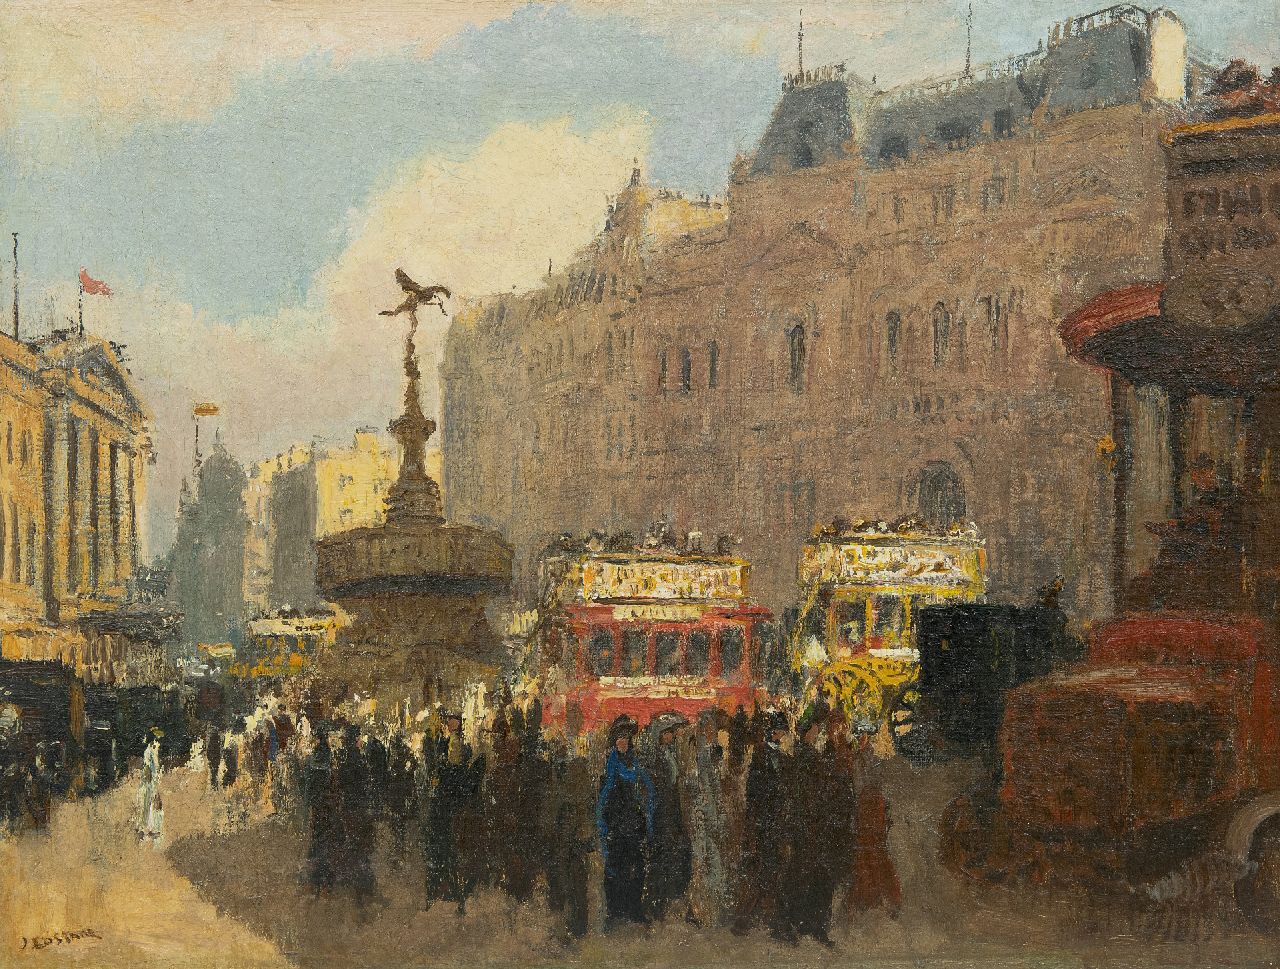 Cossaar J.C.W.  | Jacobus Cornelis Wyand 'Ko' Cossaar | Paintings offered for sale | Picadilly Circus, London, oil on canvas 46.5 x 61.2 cm, signed l.l. and painted ca. 1901-1909